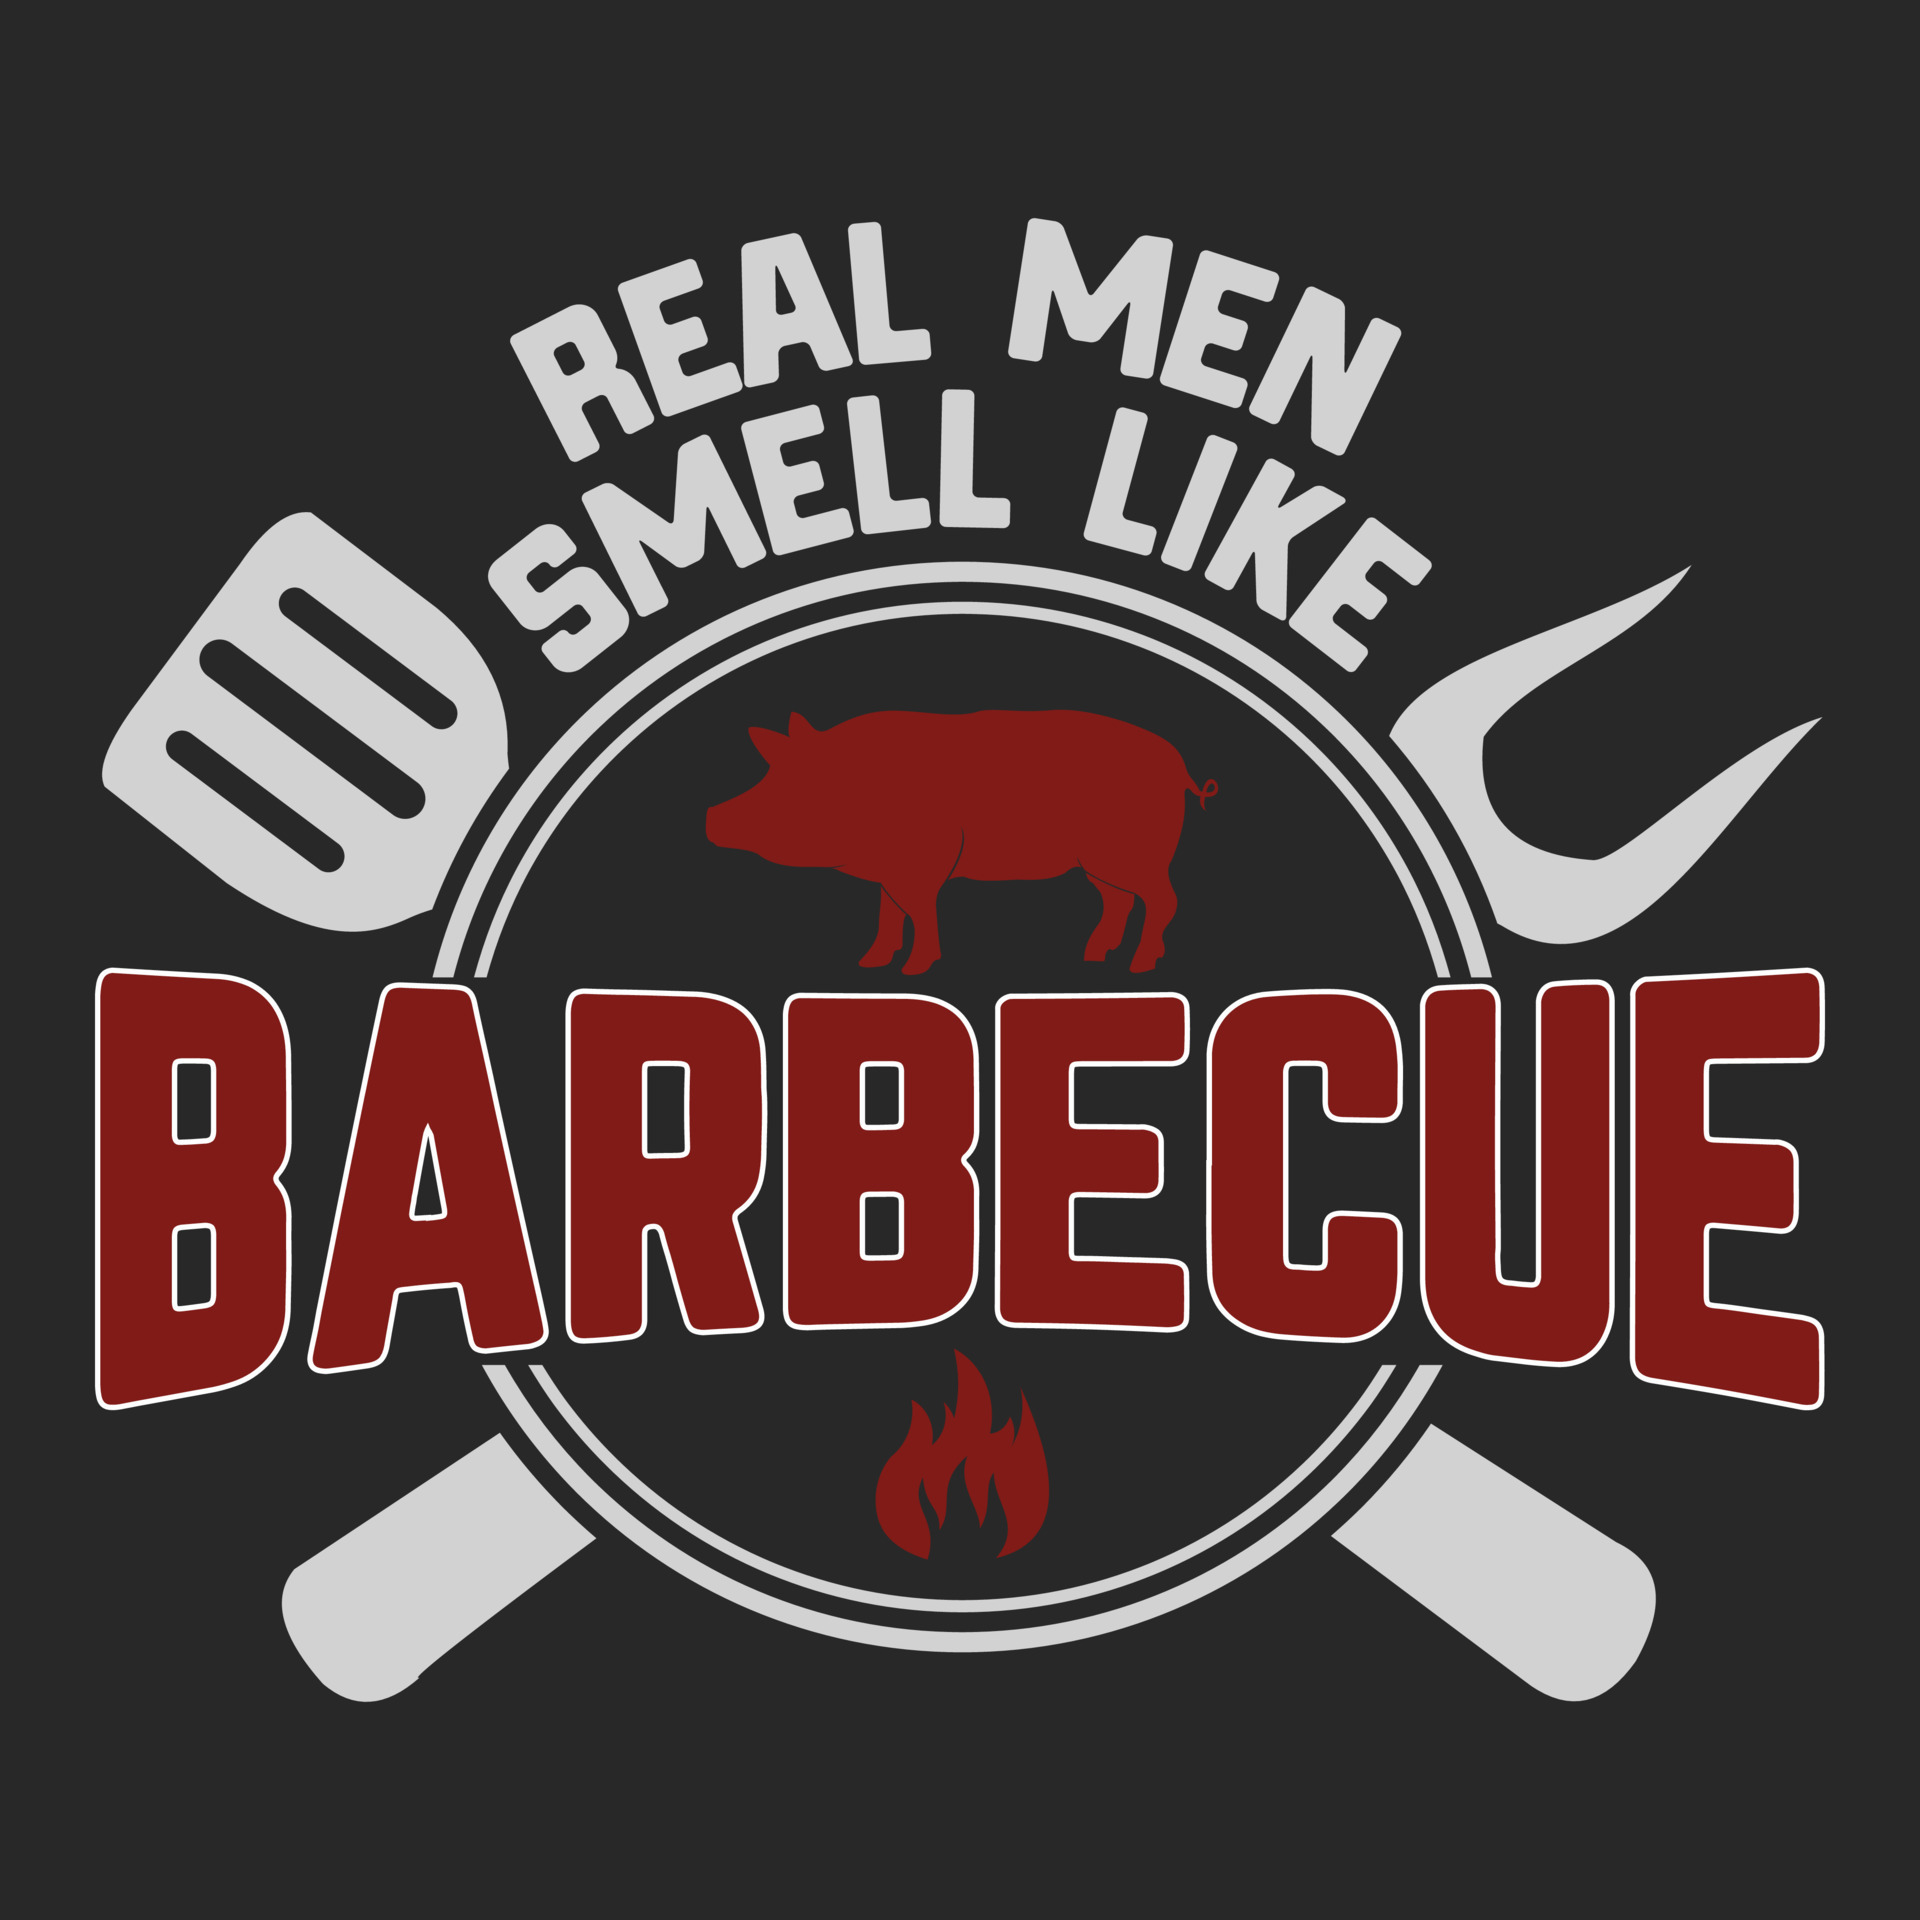 https://static.vecteezy.com/system/resources/previews/023/789/681/original/real-men-smell-like-barbecue-funny-bbq-father-s-day-gift-t-shirt-vector.jpg